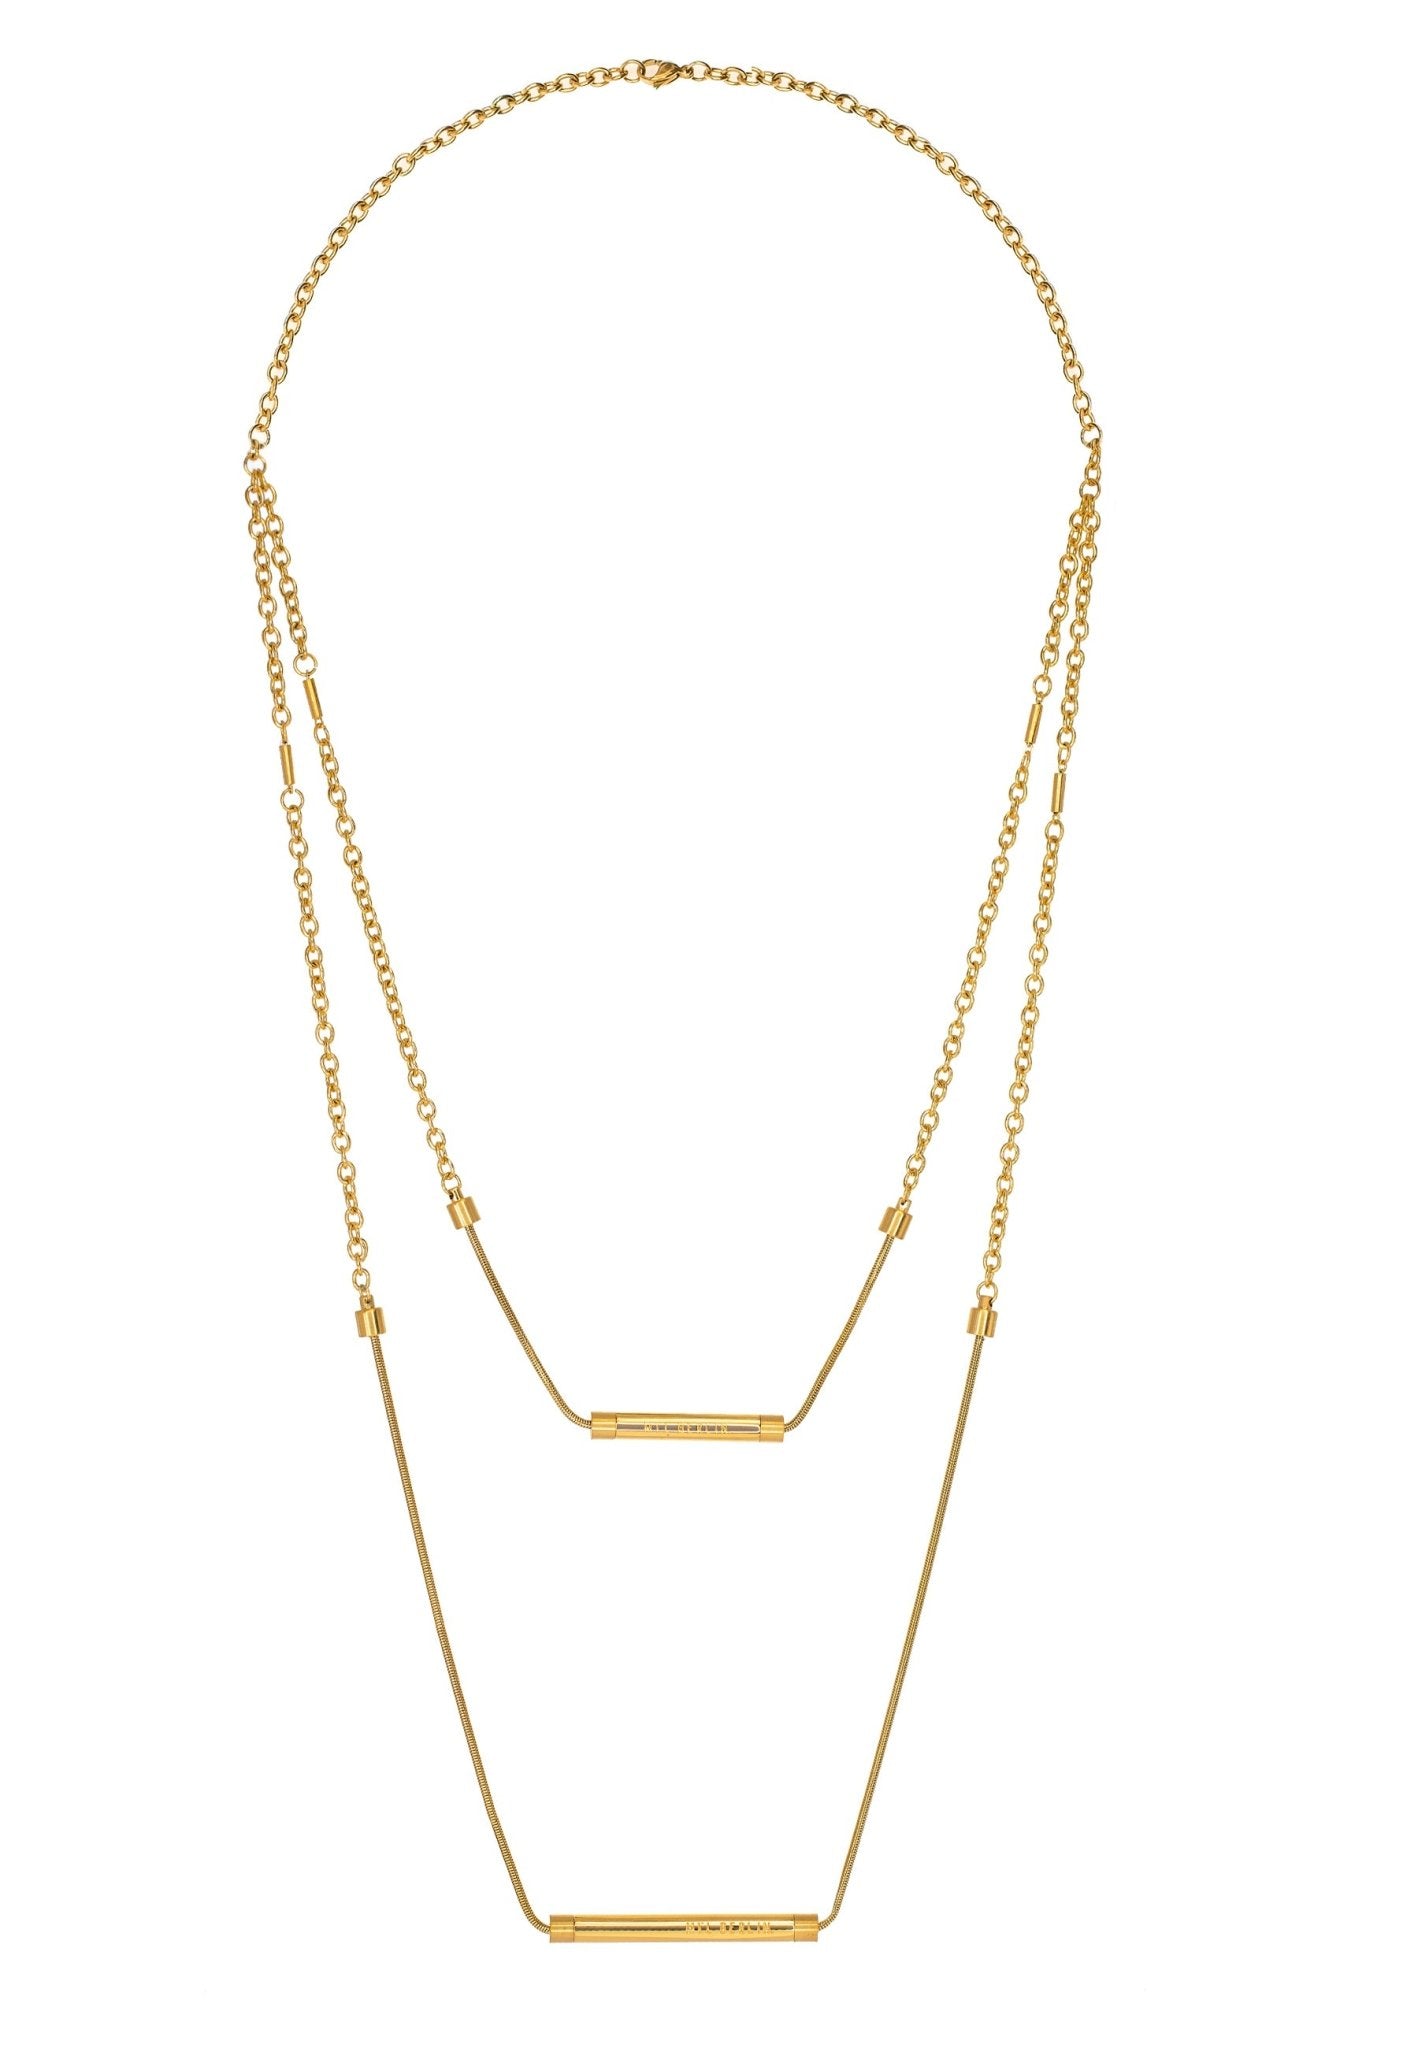 Layered Chain Tube Necklace - MYL BERLIN - 4260654111491 - 4260654111491